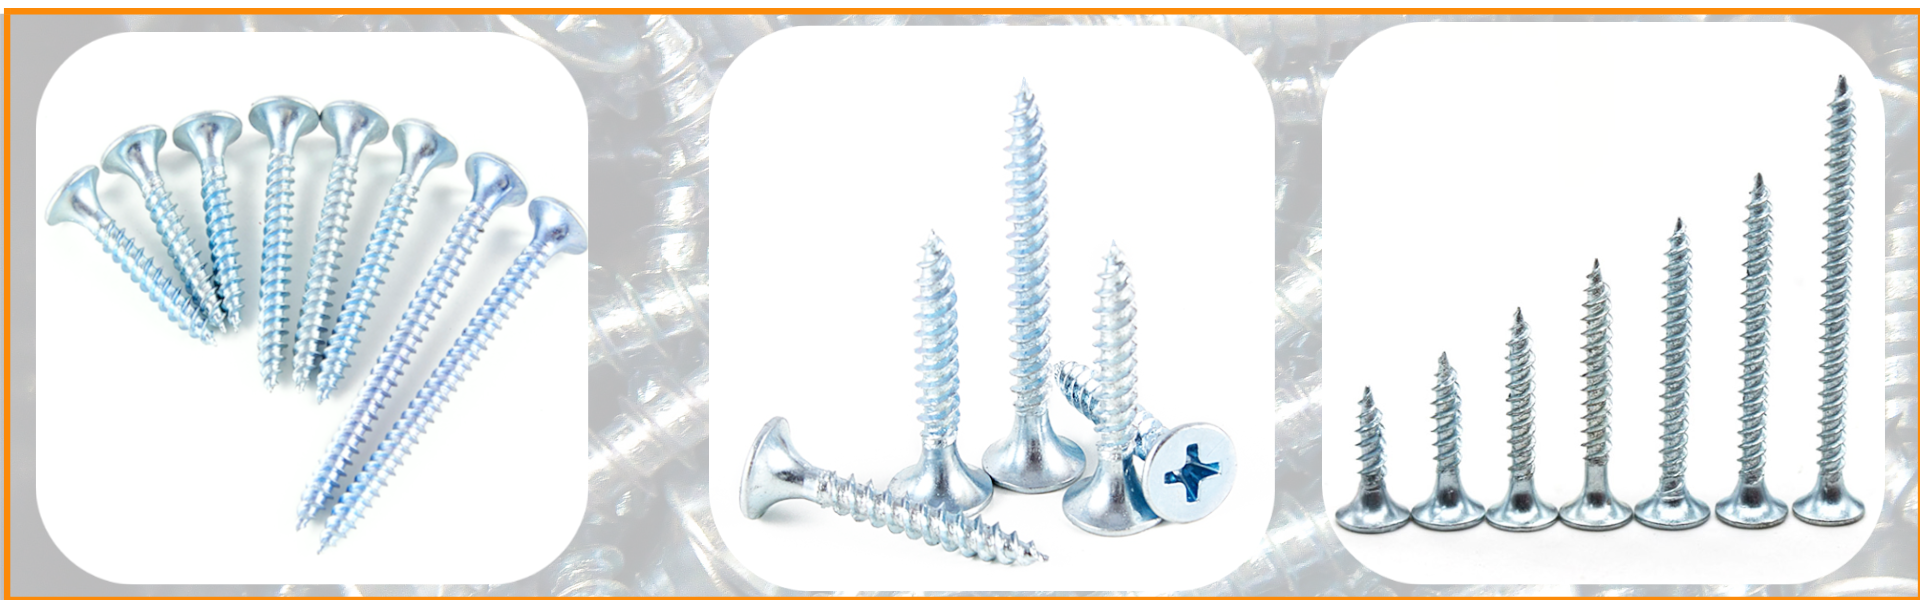 Galvanized screws for industrial drywall applications